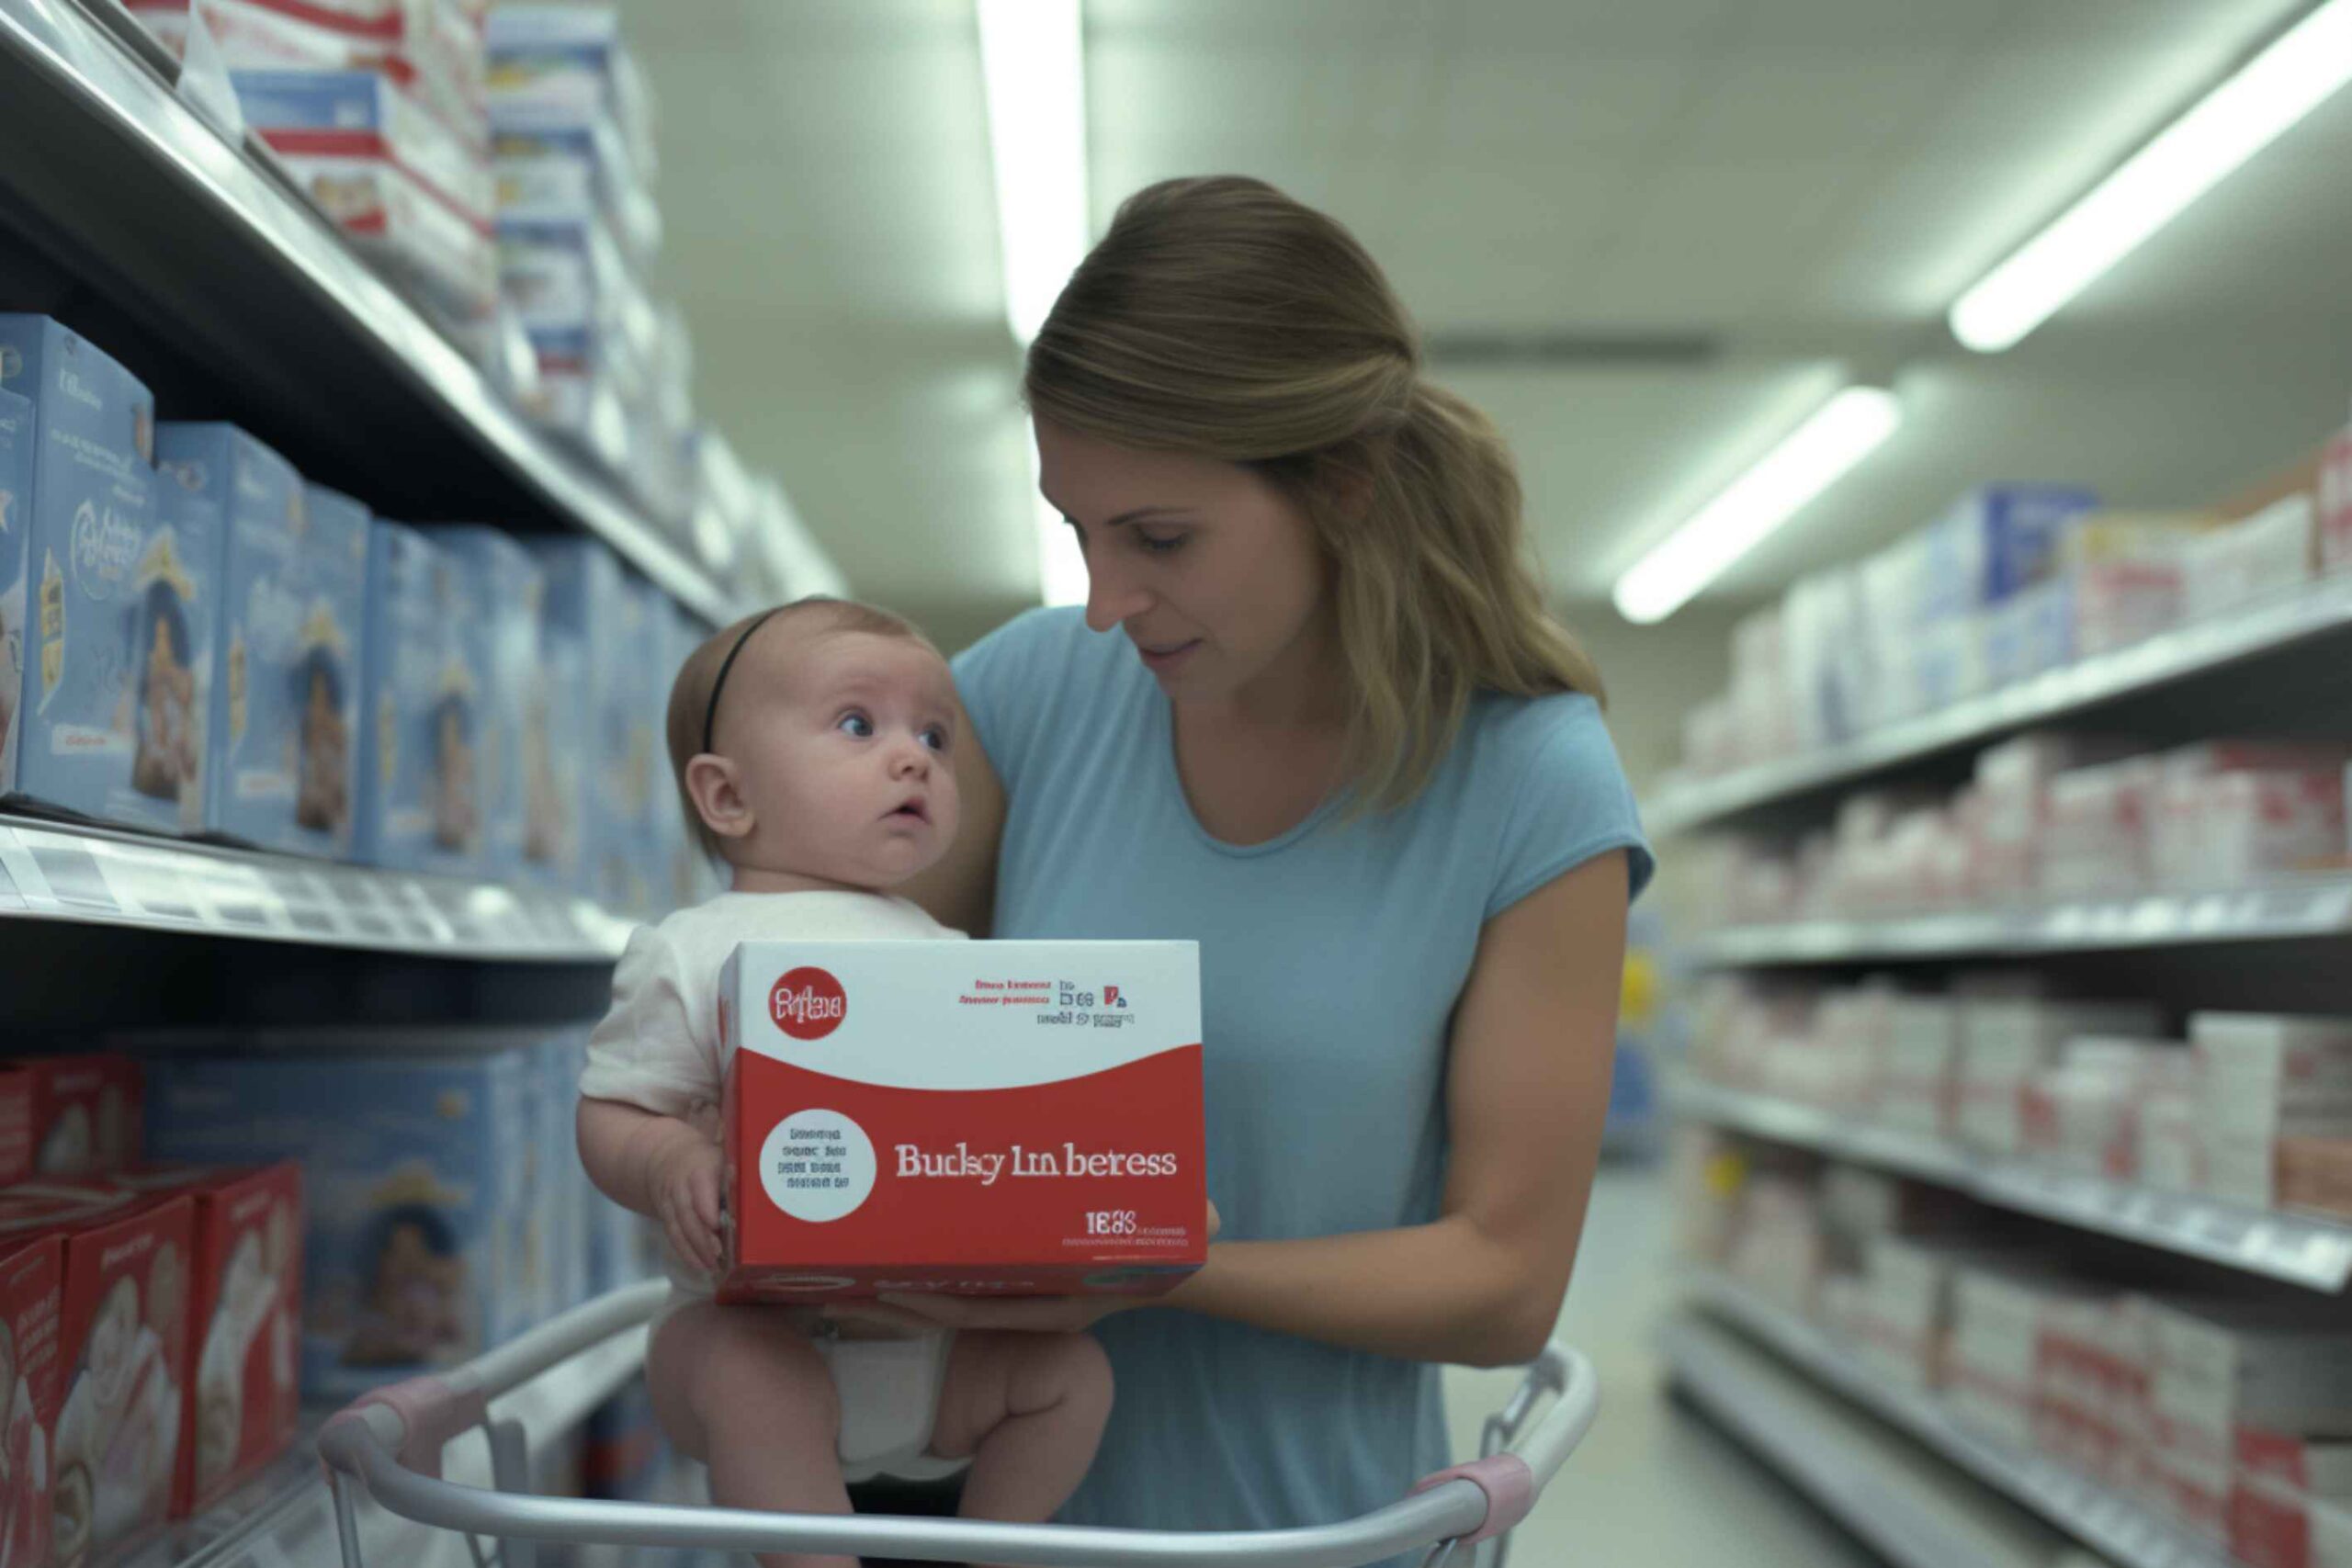 Easy Steps To Return Diapers At Target - No Hassle!